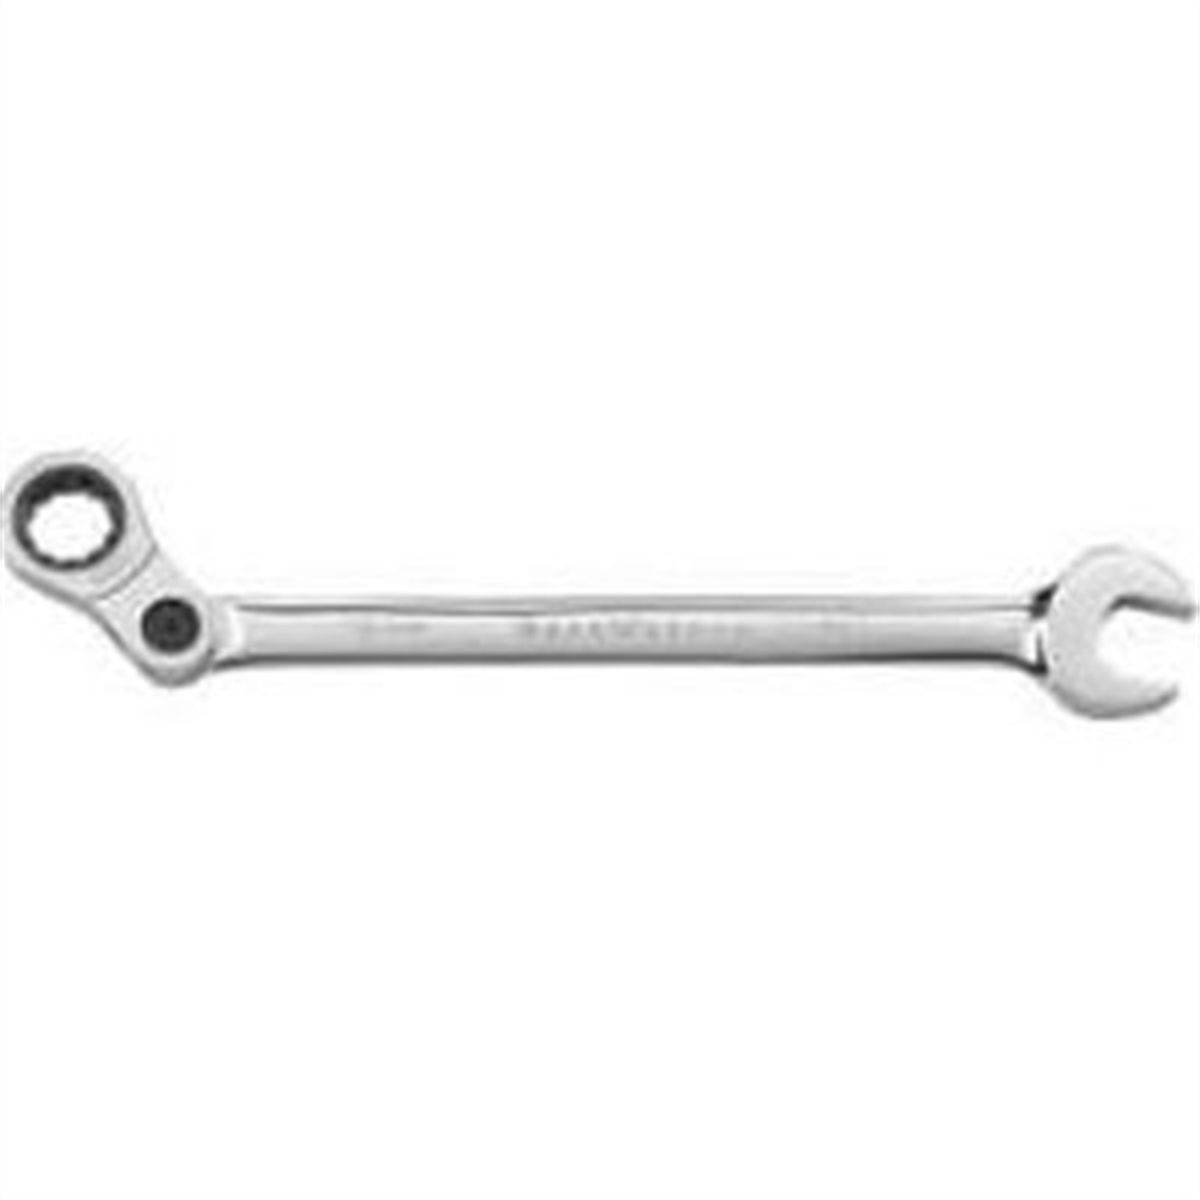 18MM INDEXING COMBINATION WRENCH